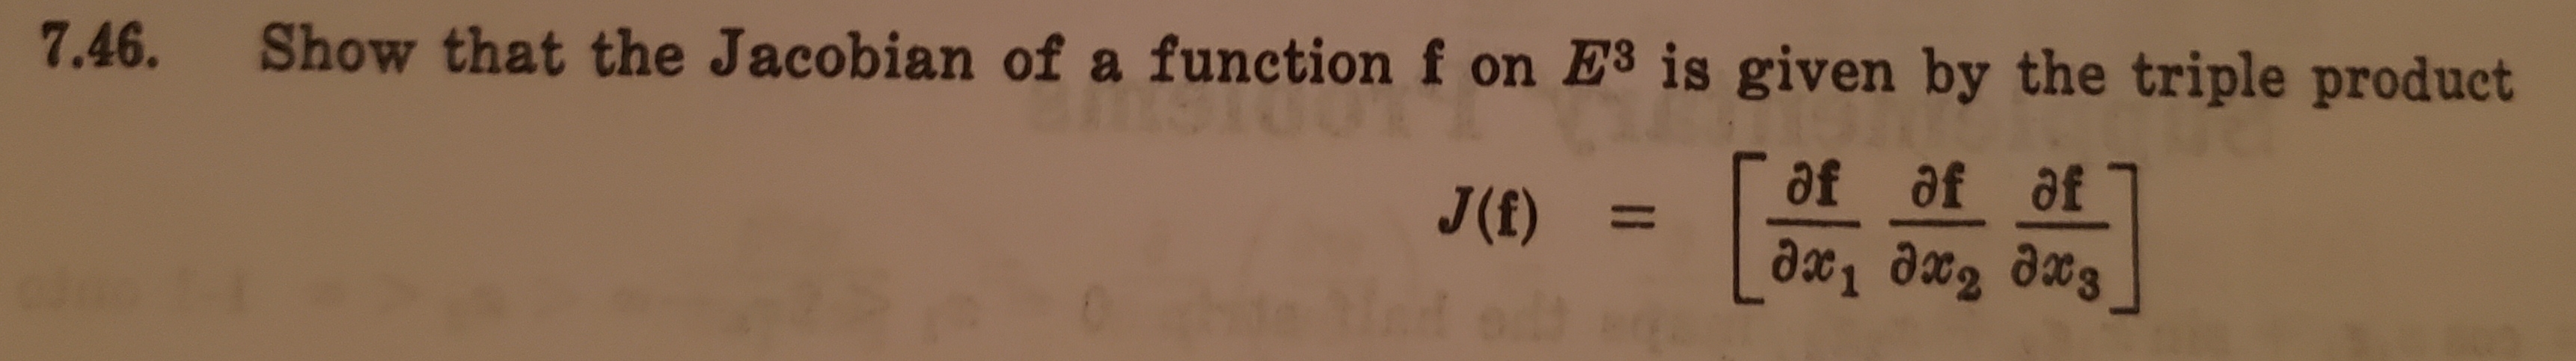 Show that the Jacobian of a function f on E3 is given by the triple product
7.46.
af af af
J(f)
11
Ca
